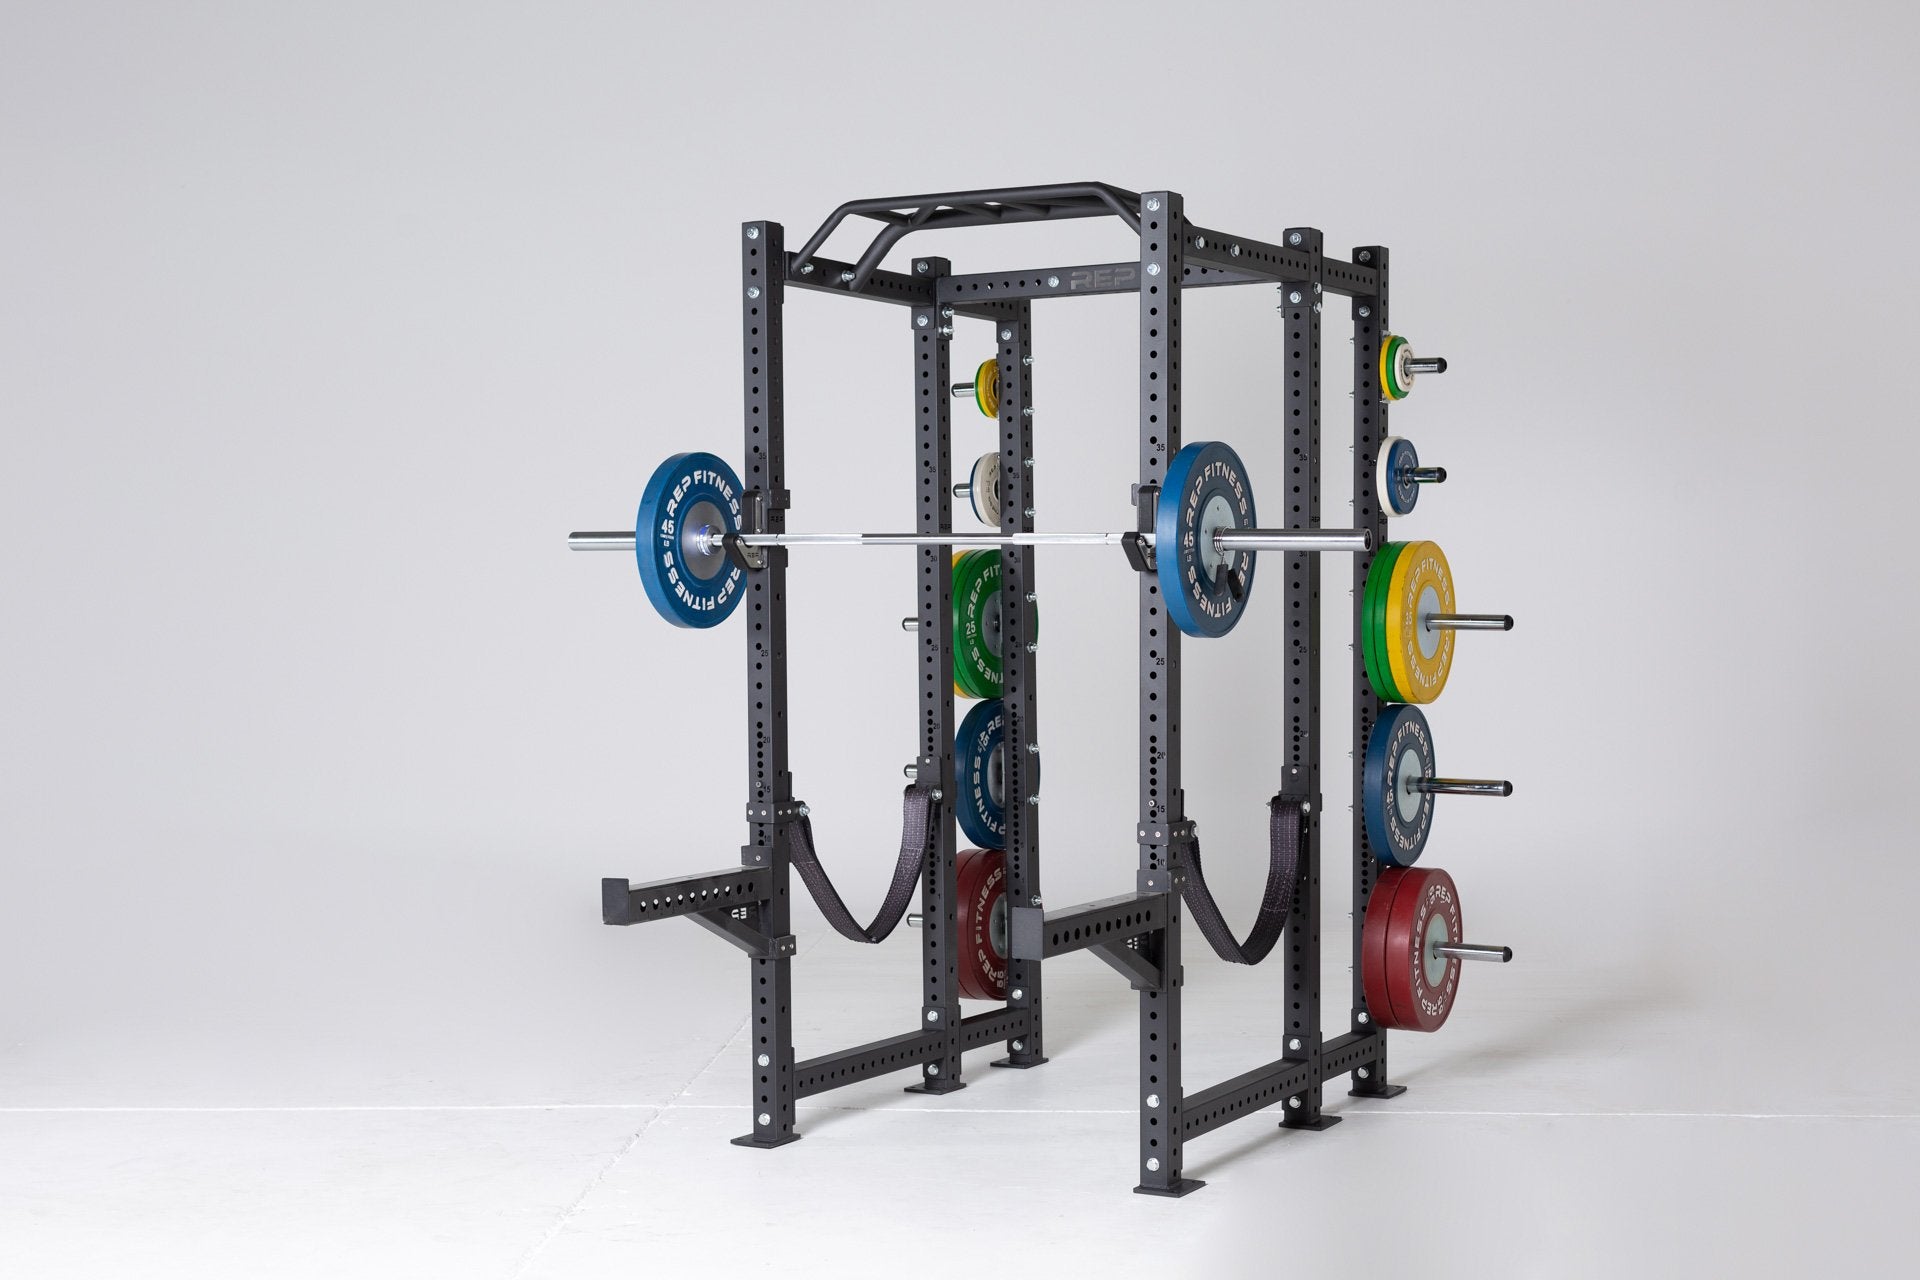 Full view of a REP 6-post PR-4000 power rack with green 25, yellow 35, blue 45, and red 55lb competition bumper plates on the weight horns, and a racked barbell loaded with blue 45lb competition bumper plates.